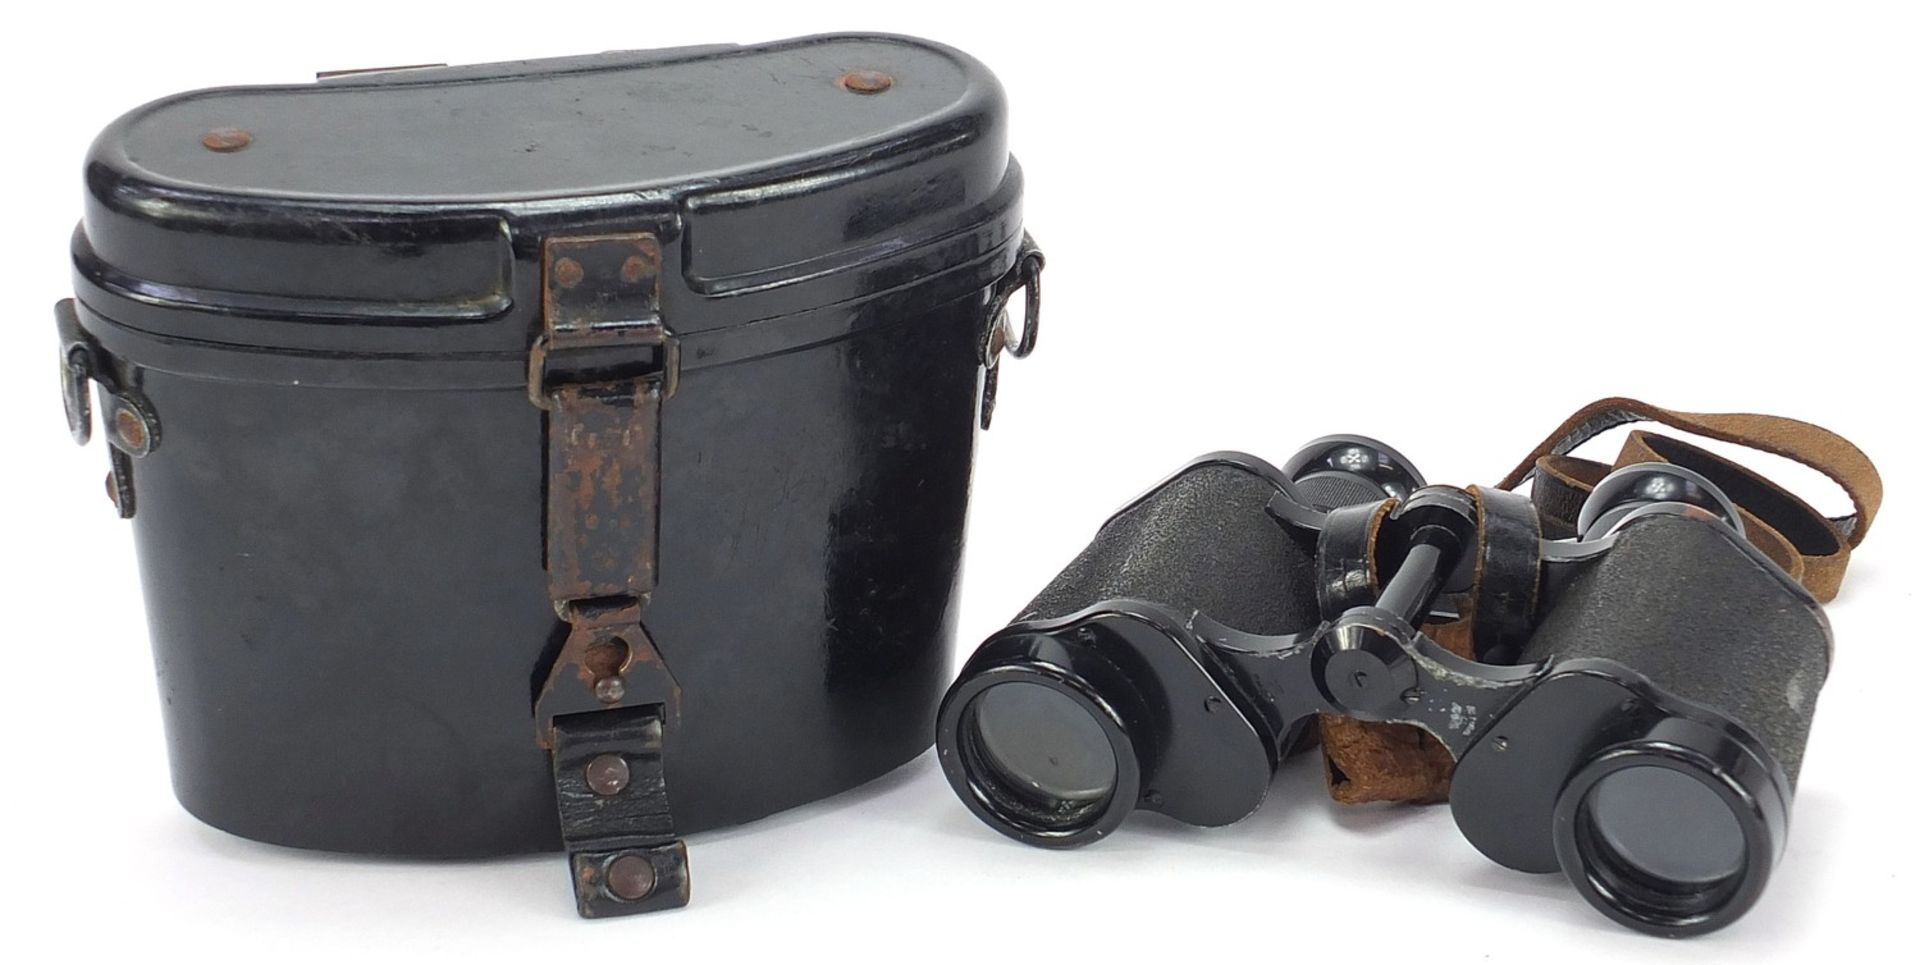 Pair of military interest Carl Zeiss Jena 6 x 30 binoculars with case numbered 1941734 :For